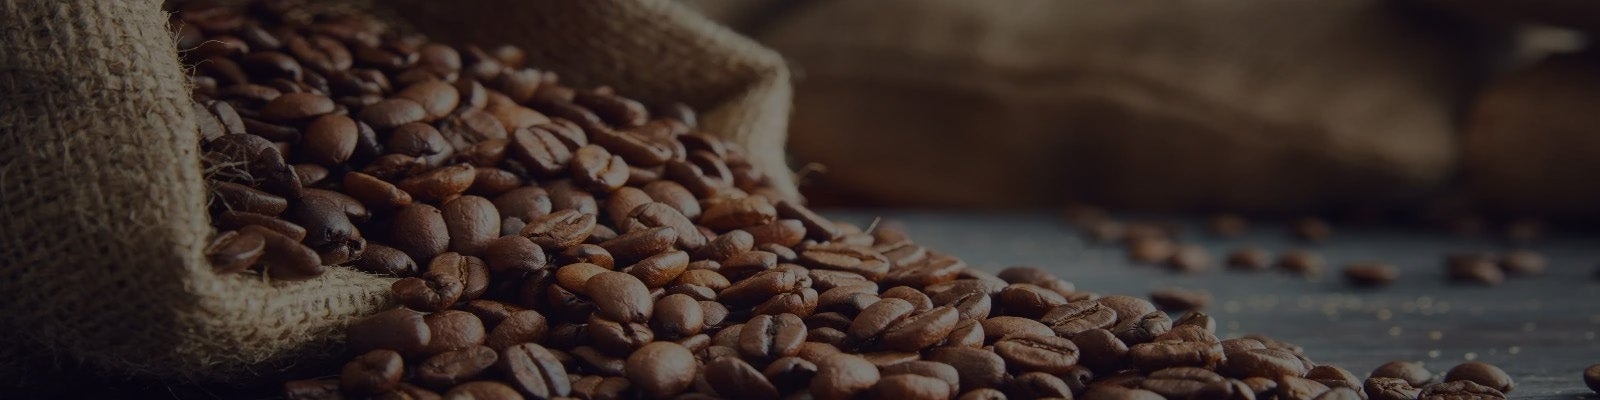 Where Do Coffee Beans Come From?